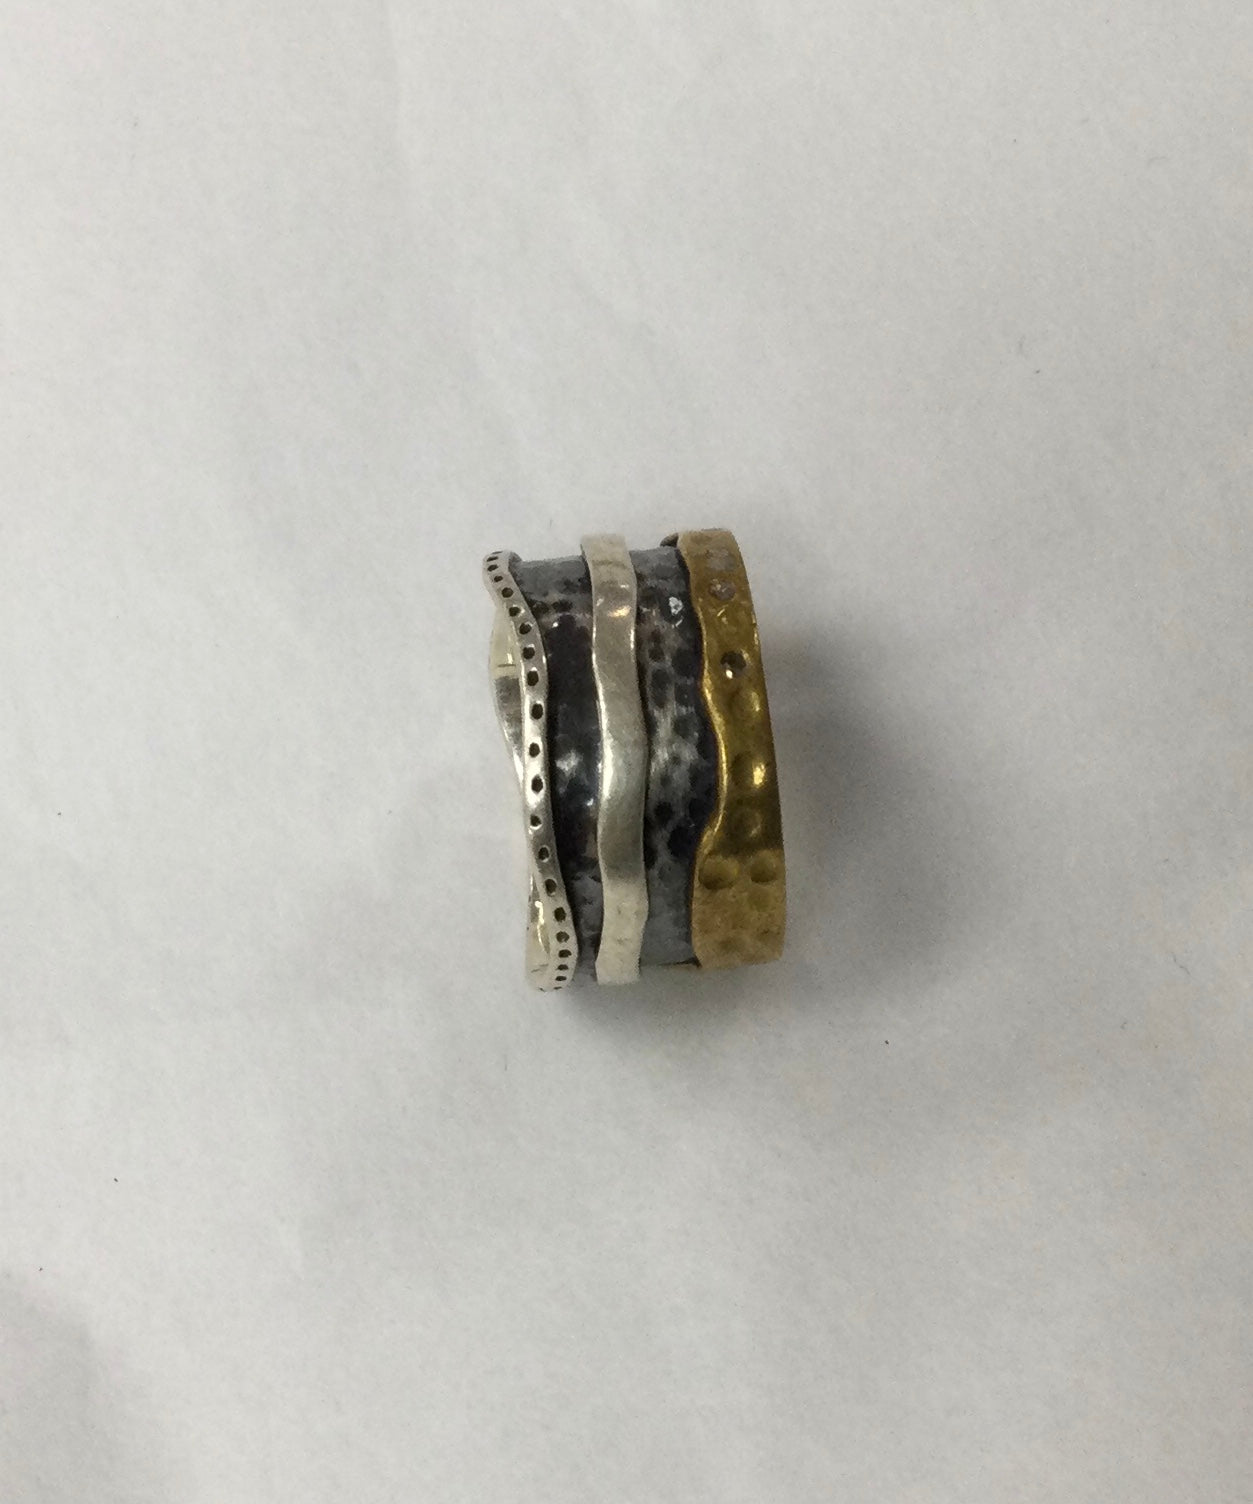 Meditation Ring, Size 9, Silver with Large Gold Wave, Silver Speckled Wave, and Silver Band